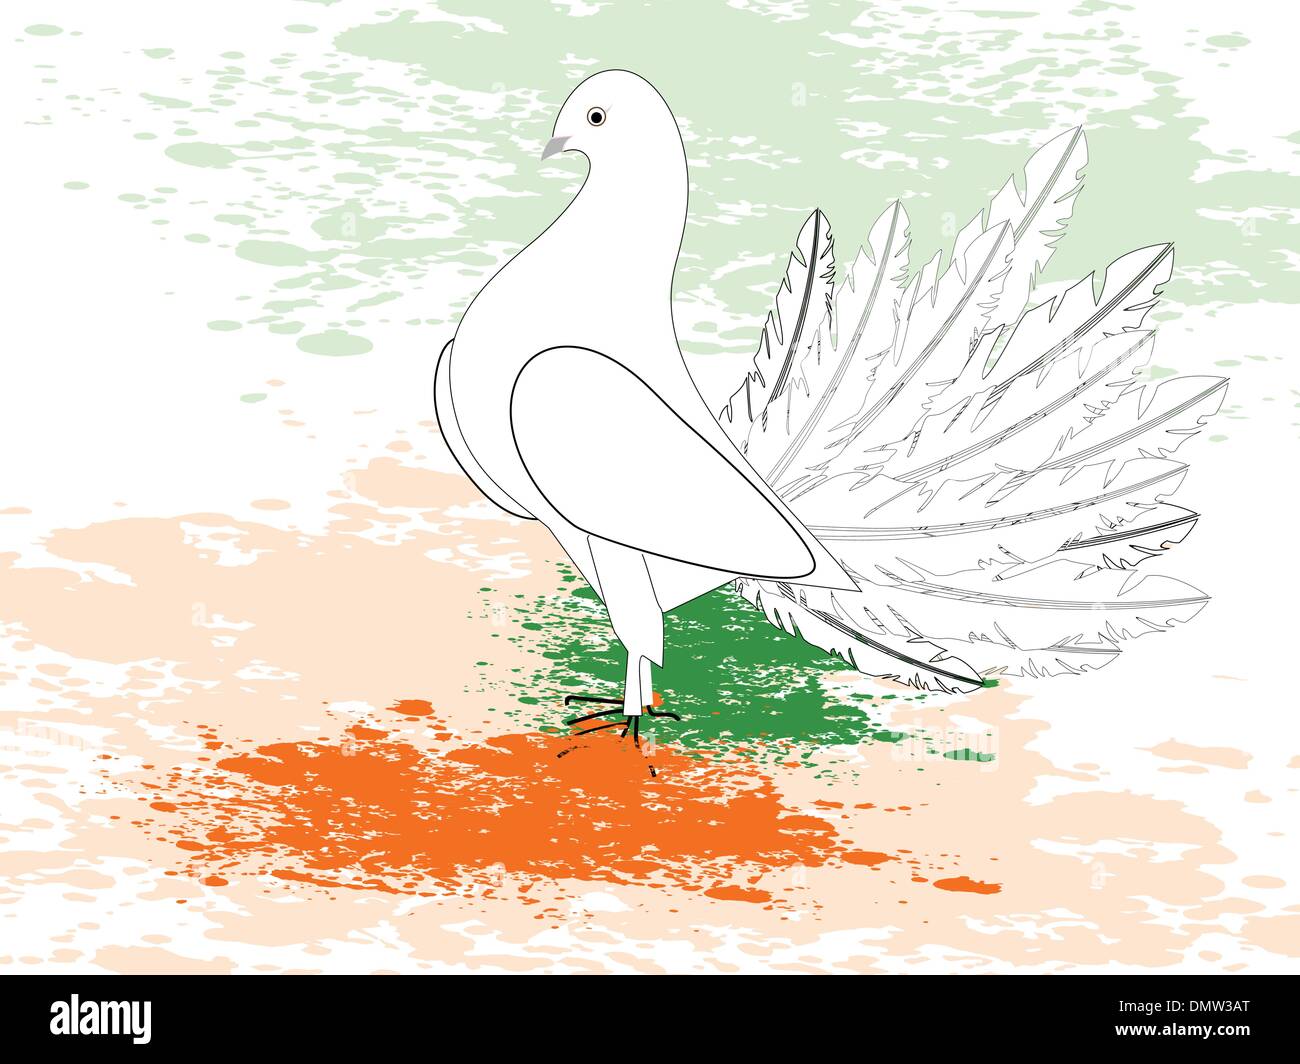 26 January Indian Republic Day Coloring Page for Kids  Free Republic Day   India Printable Coloring Pages Online for Kids  ColoringPages101com   Coloring Pages for Kids